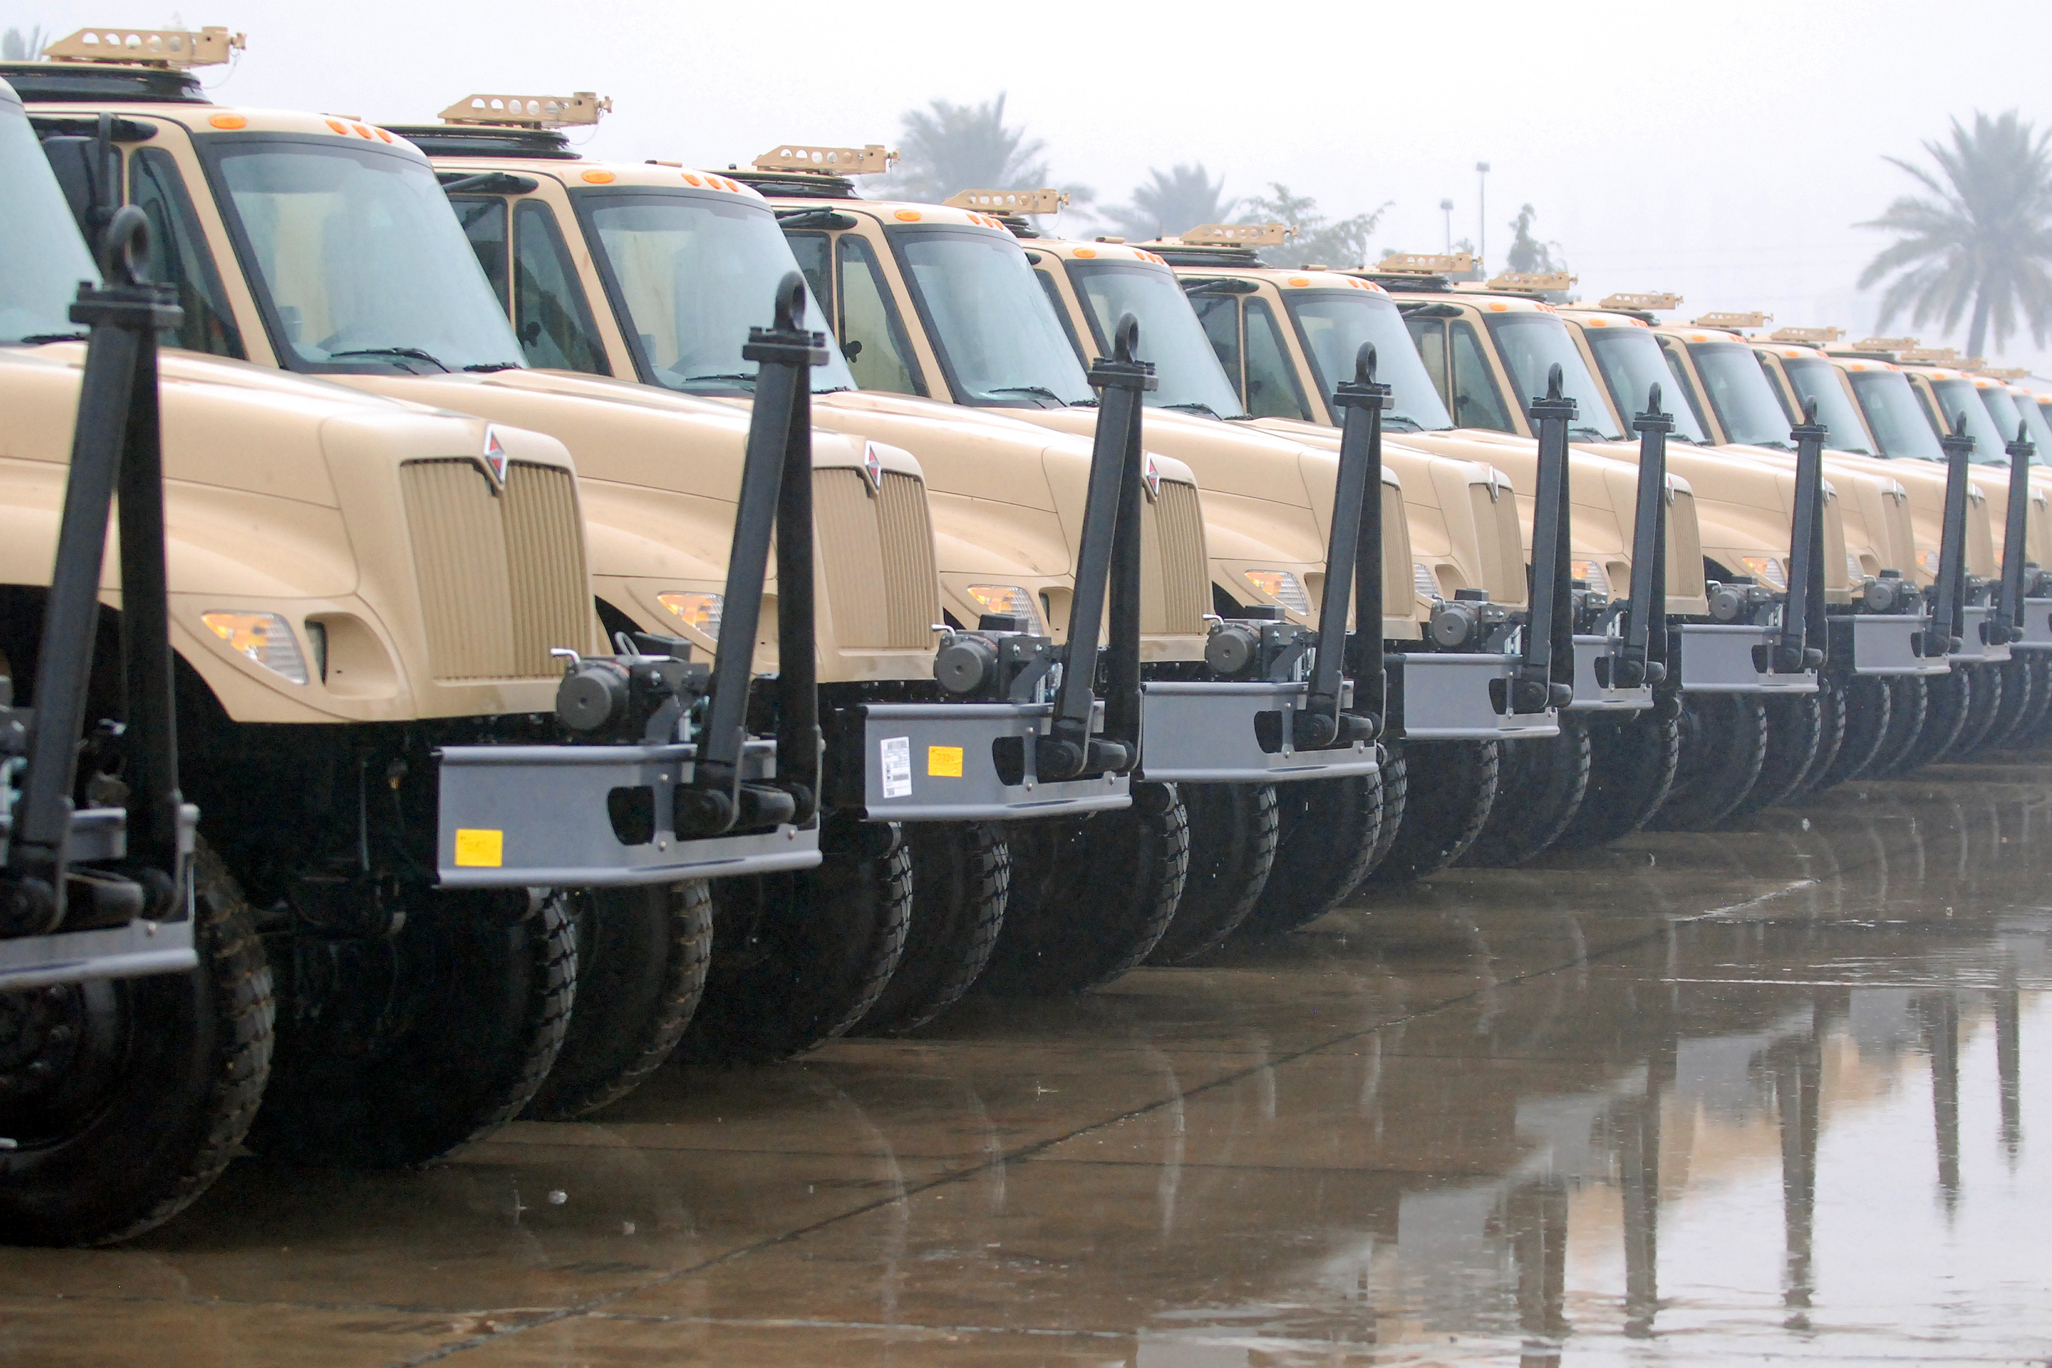  A portion of the 37 5-ton trucks delivered to the Iraqi Army Jan. 23 sit at Al Muthanna Vehicle Warehouse.